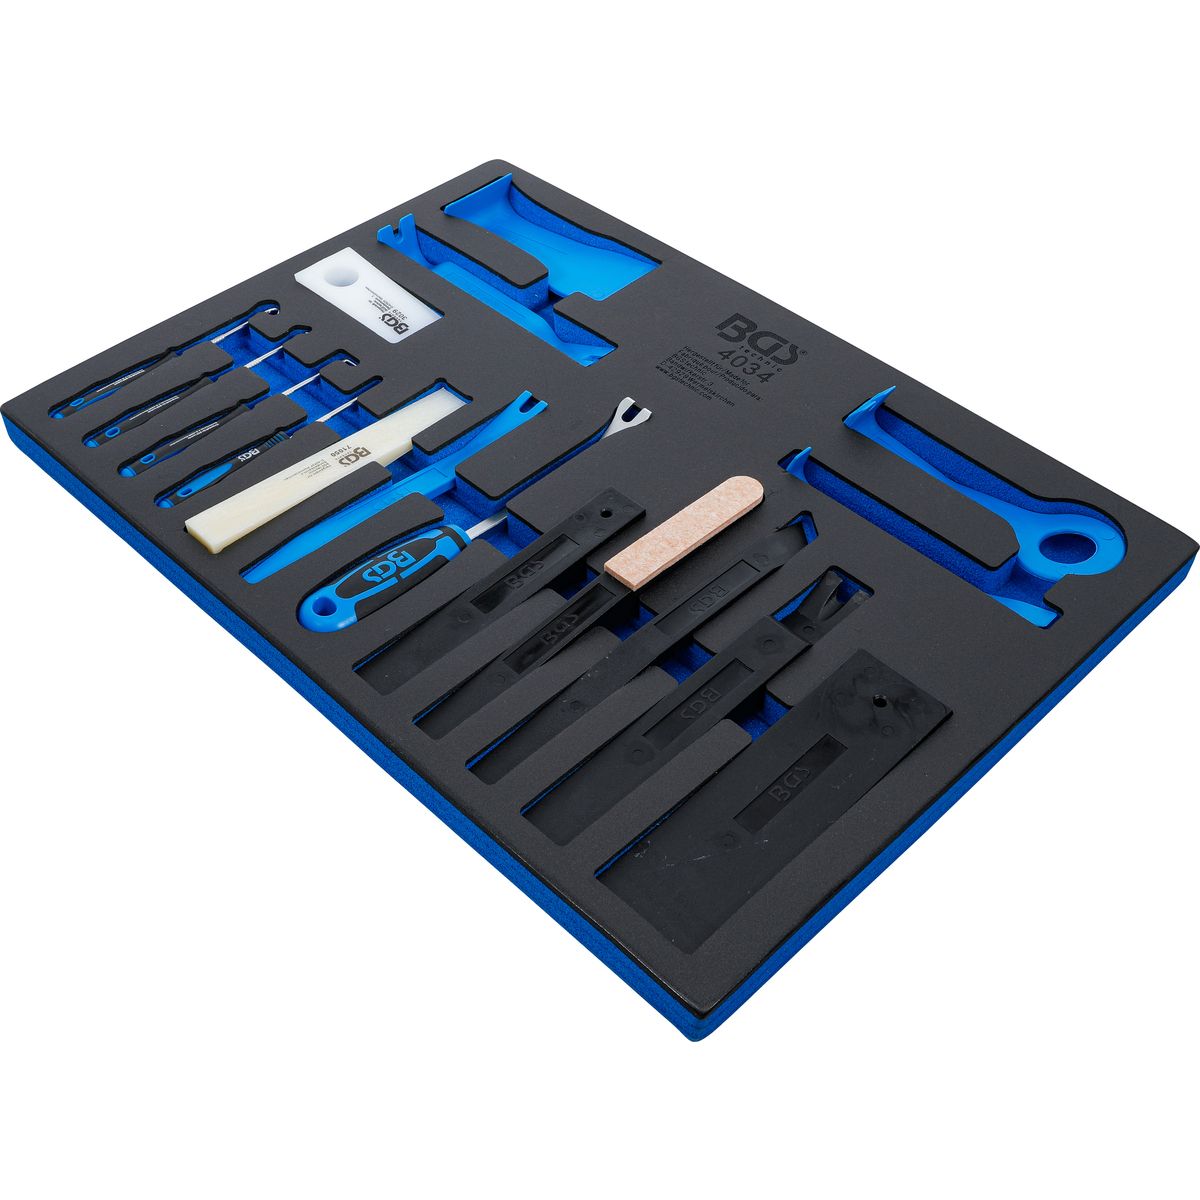 Tool Tray 3/3: Release Tools, Assembly Wedge and Hook Set | 17 pcs.